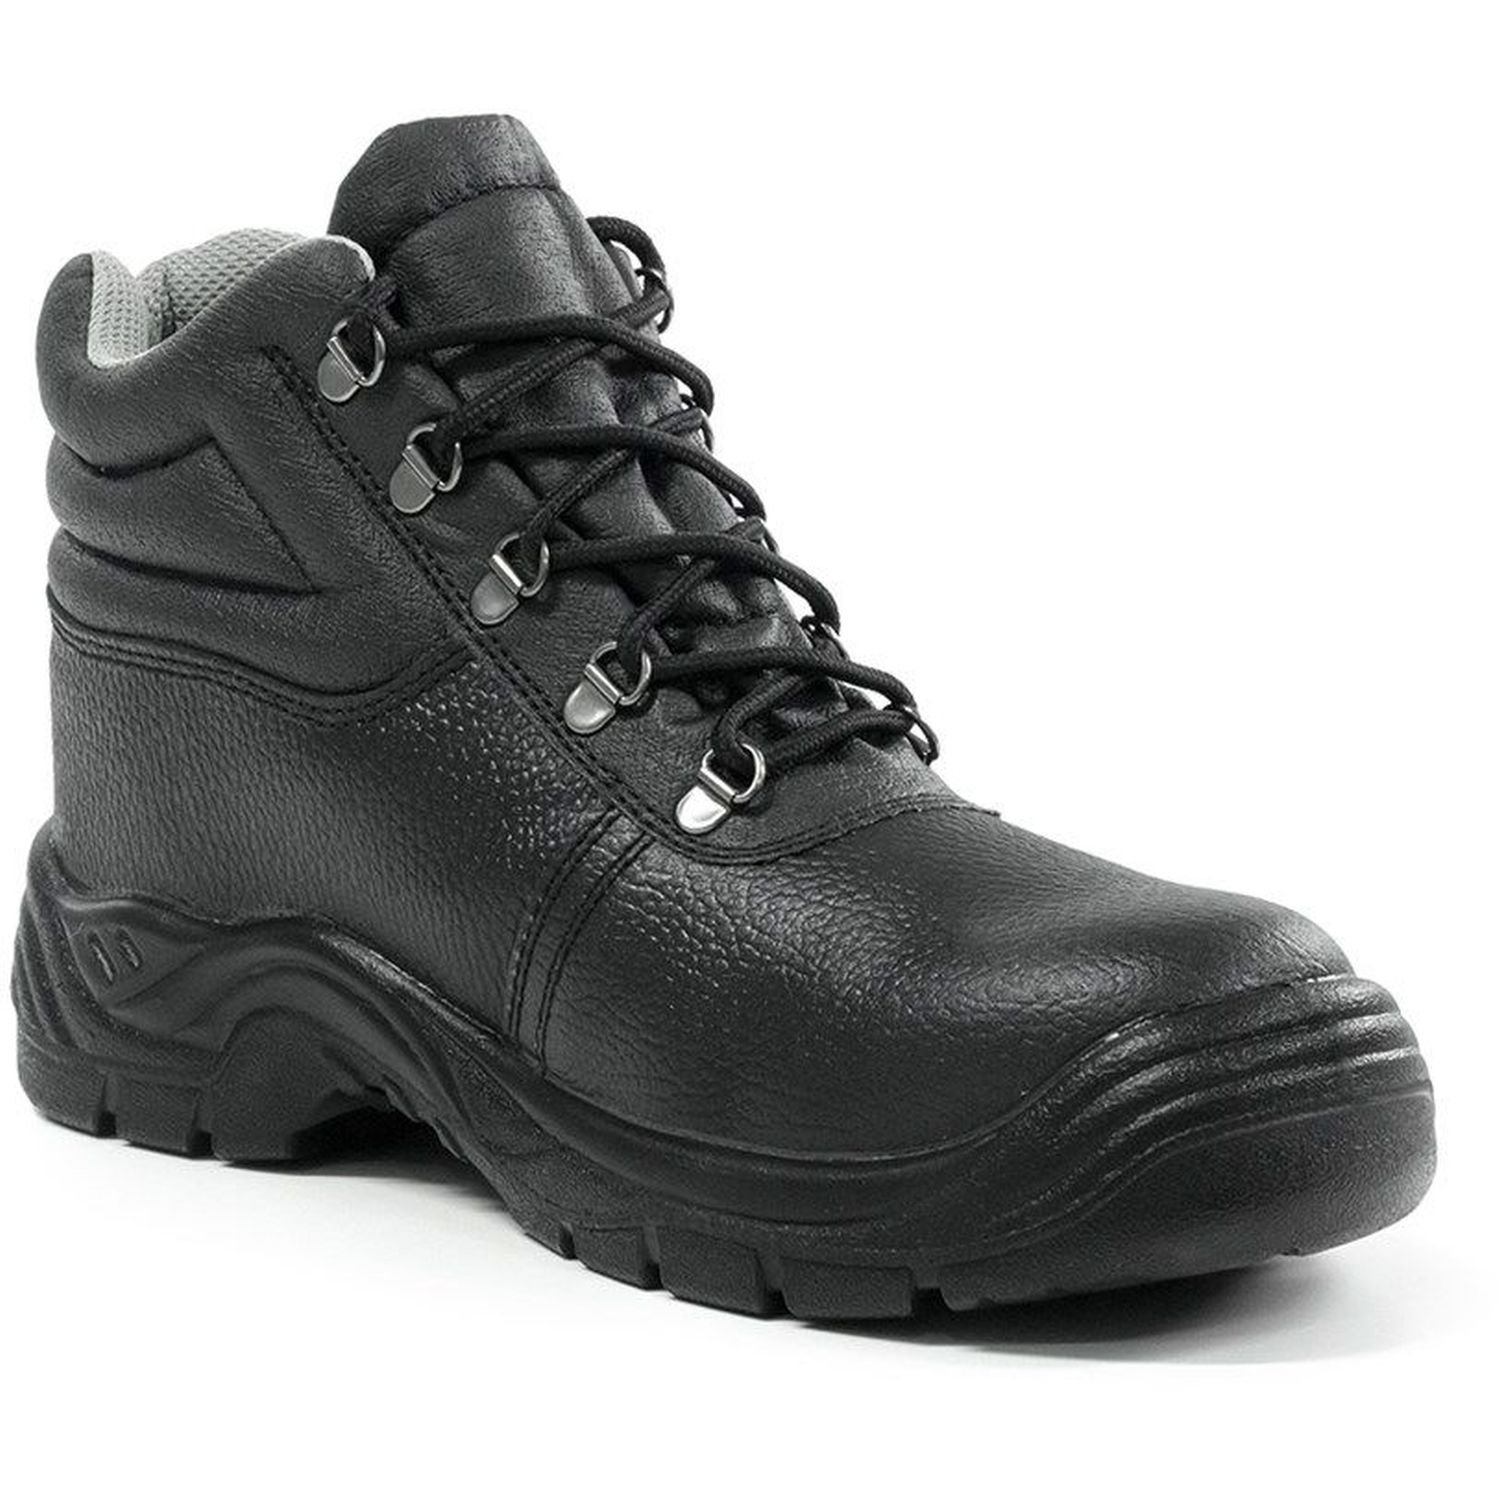 Bison Duty Steel Toe Lace Up Safety Boot Black